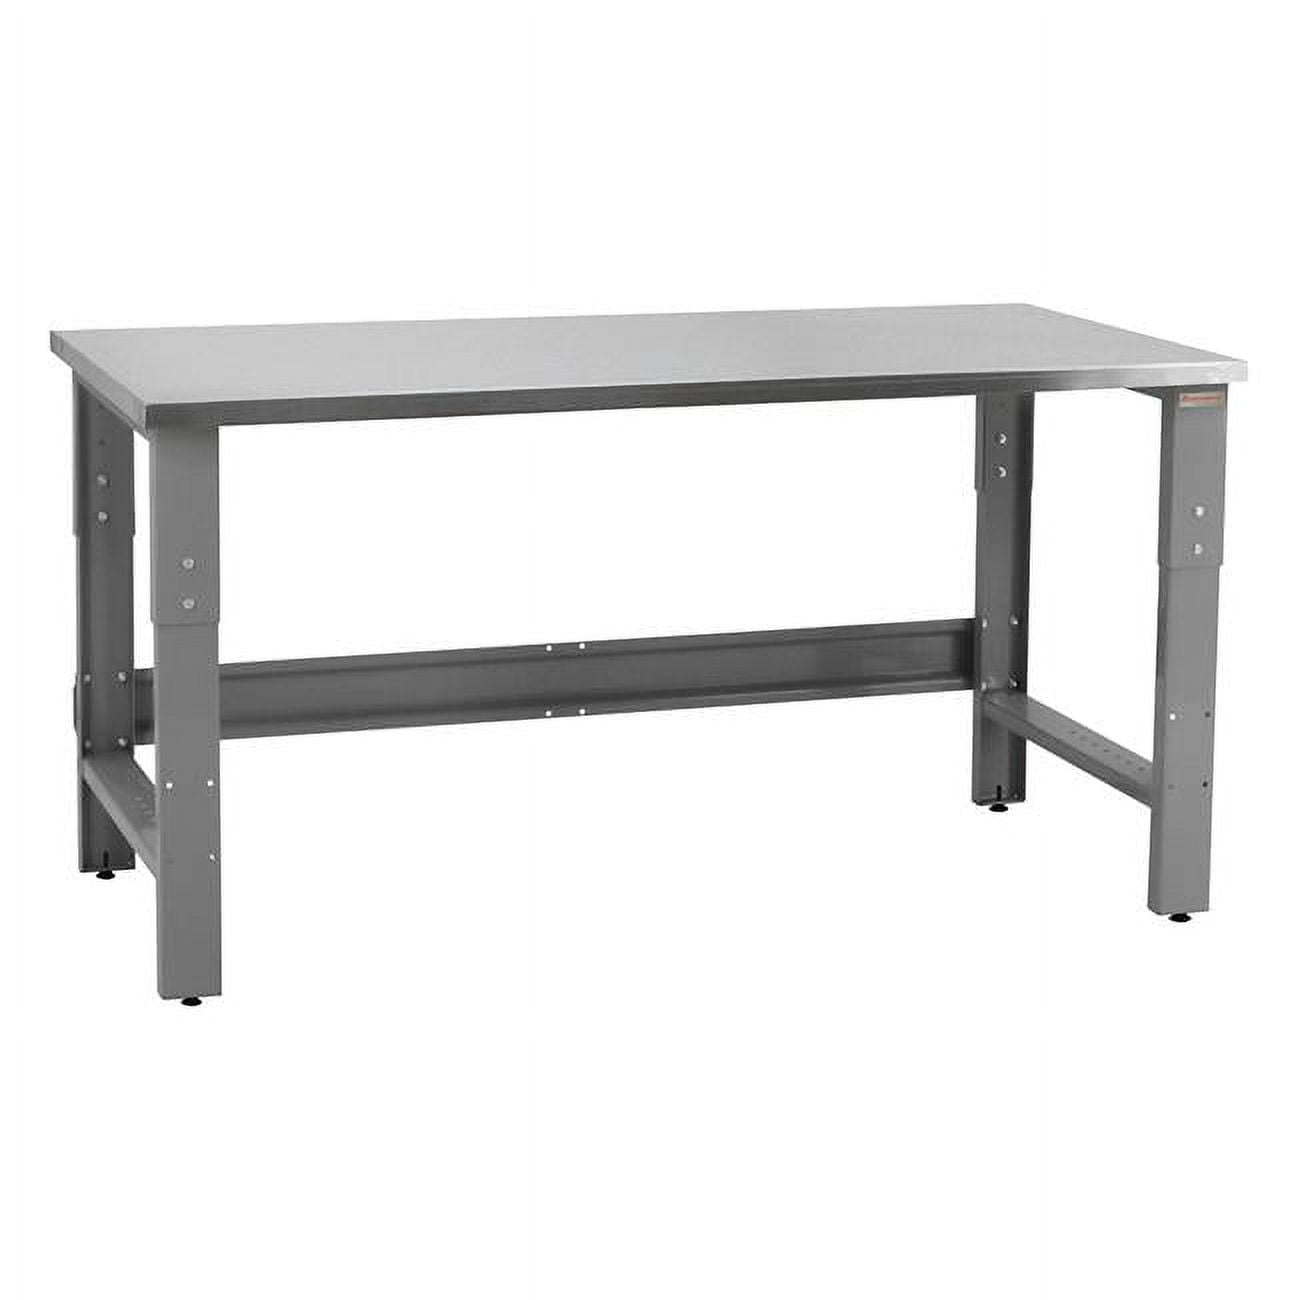 RN3660-GFr 36 x 60 x 30 to 36 in. Adjustable Height Roosevelt Workbenches with Stainless Steel Top, Gray -  BenchPro